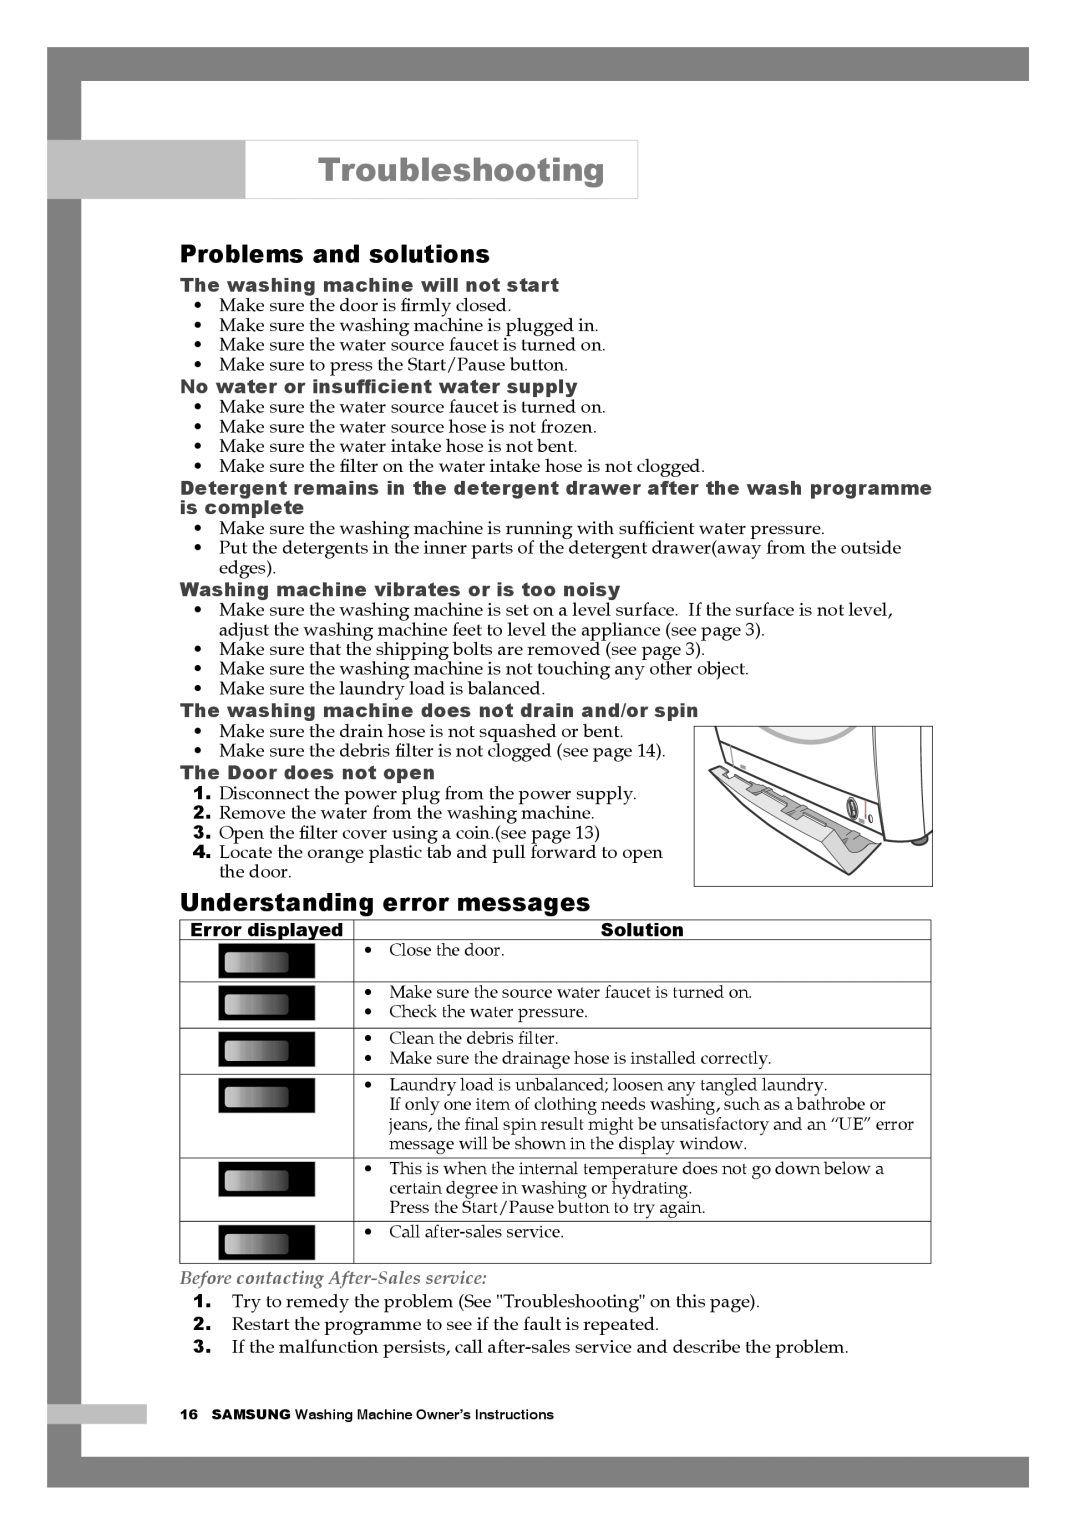 Samsung H1255AGS/XEH manual Troubleshooting, Problems and solutions, Understanding error messages, The Door does not open 